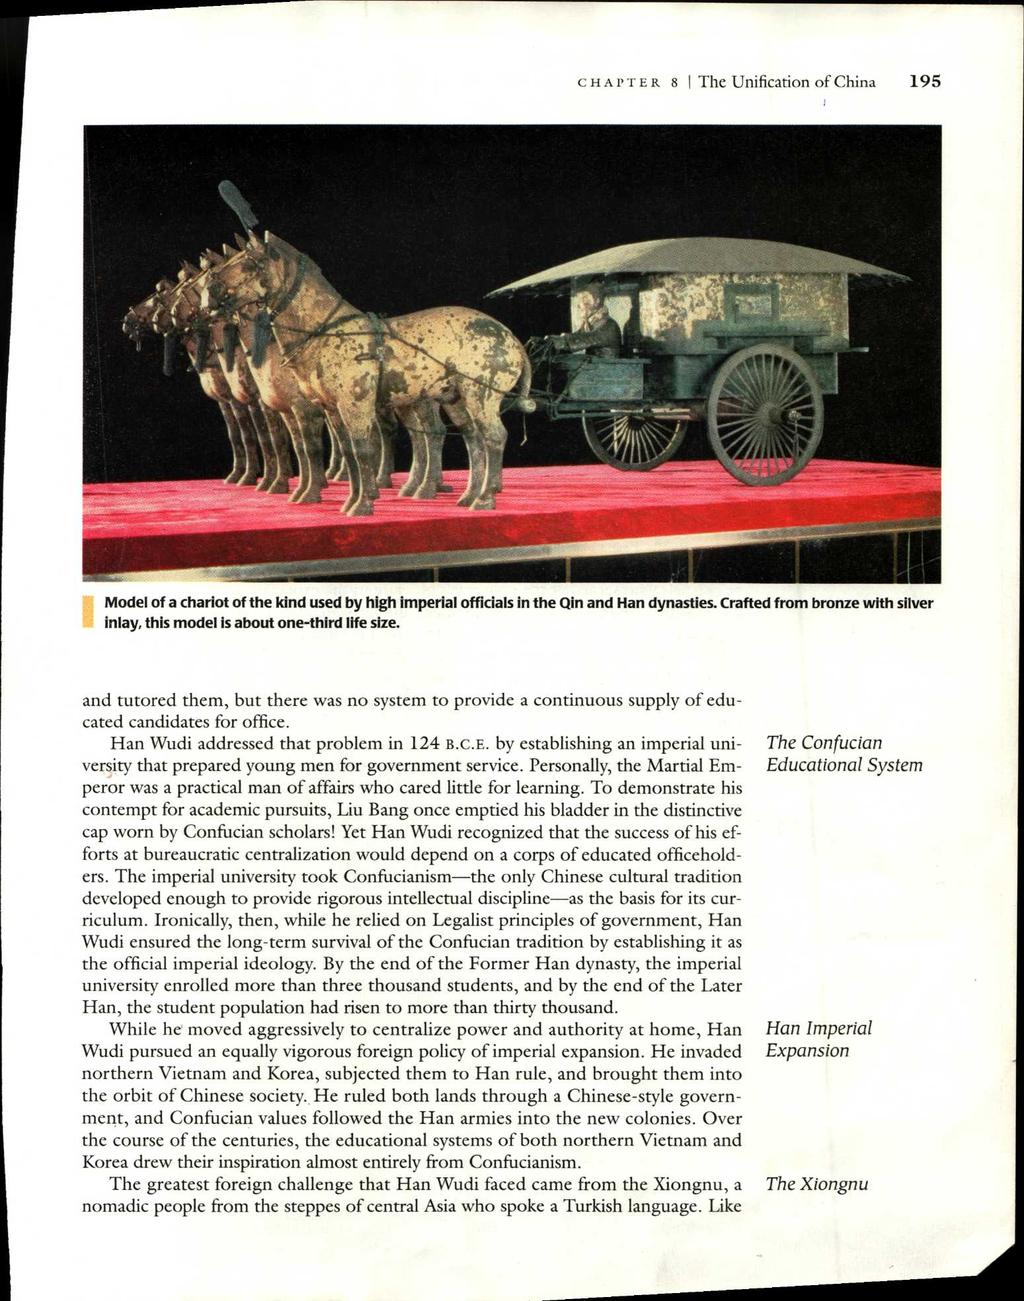 CHAPTER. 8 I The Unification of China 195 Model of a chariot of the kind used by high imperial officials in the Qin and Han dynasties.